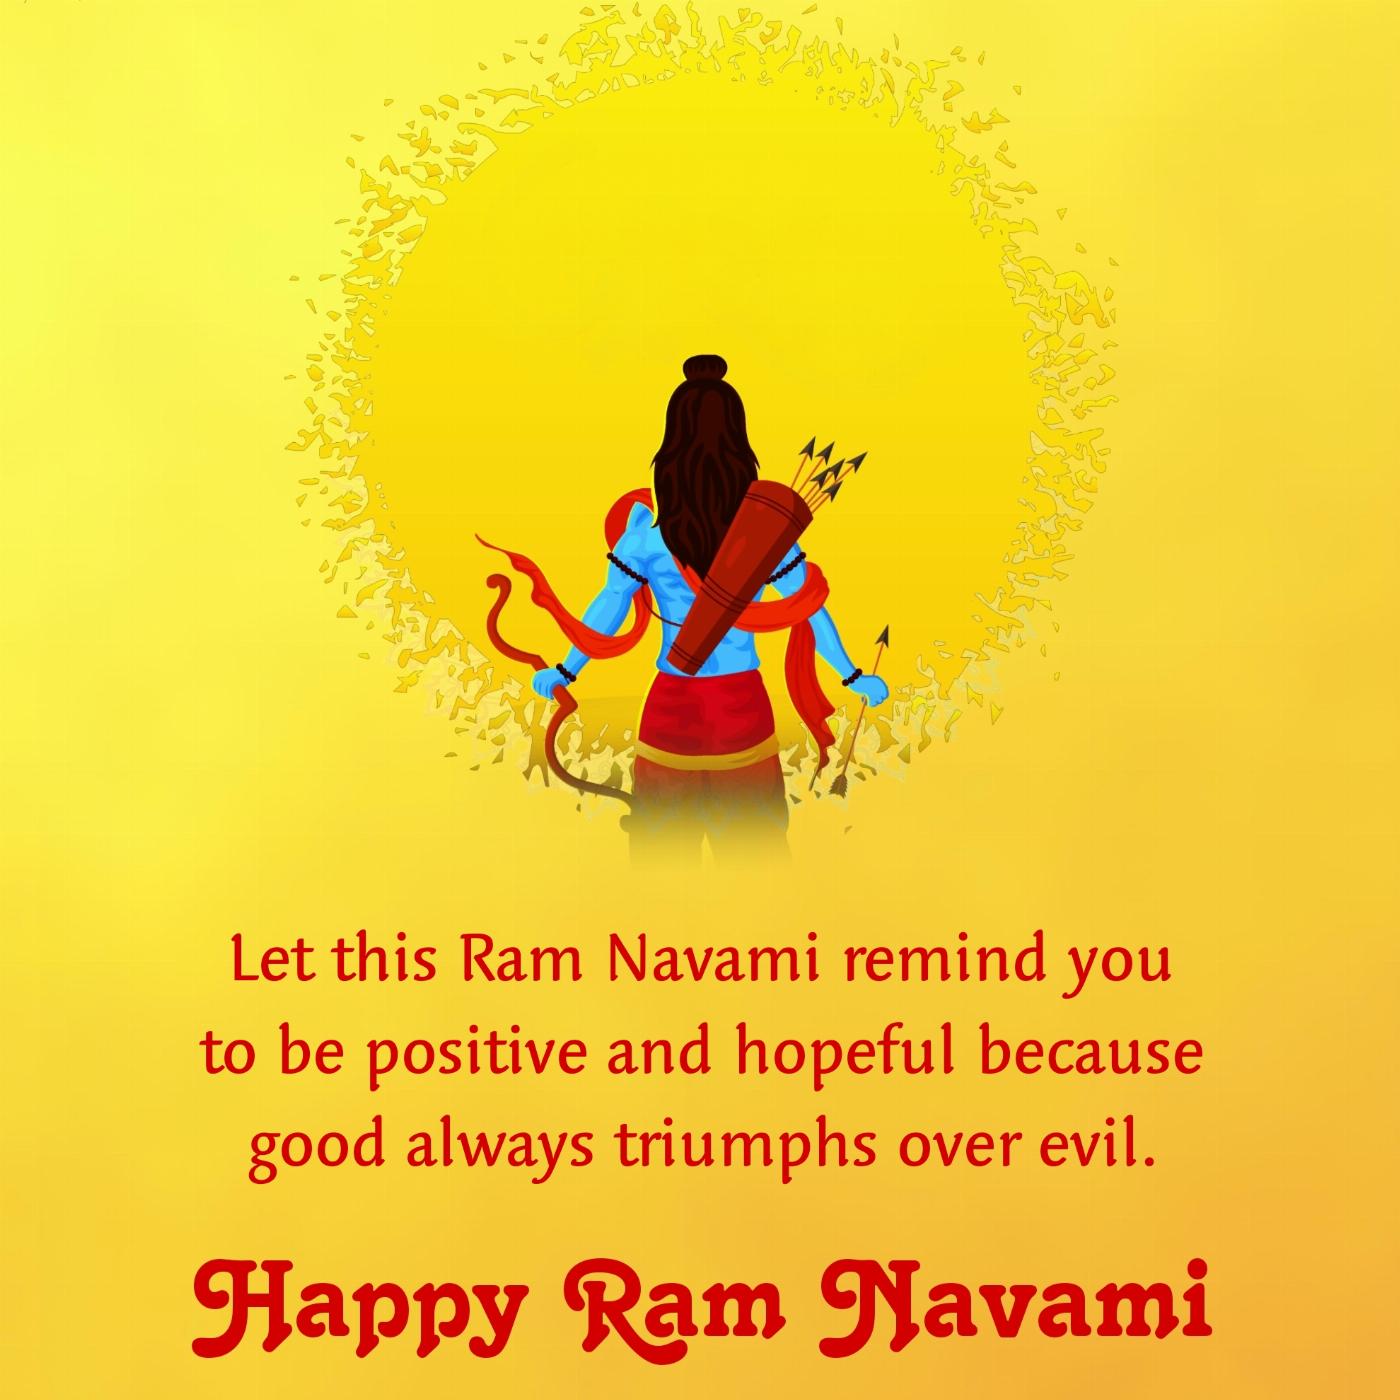 Let this Ram Navami remind you to be positive and hopeful